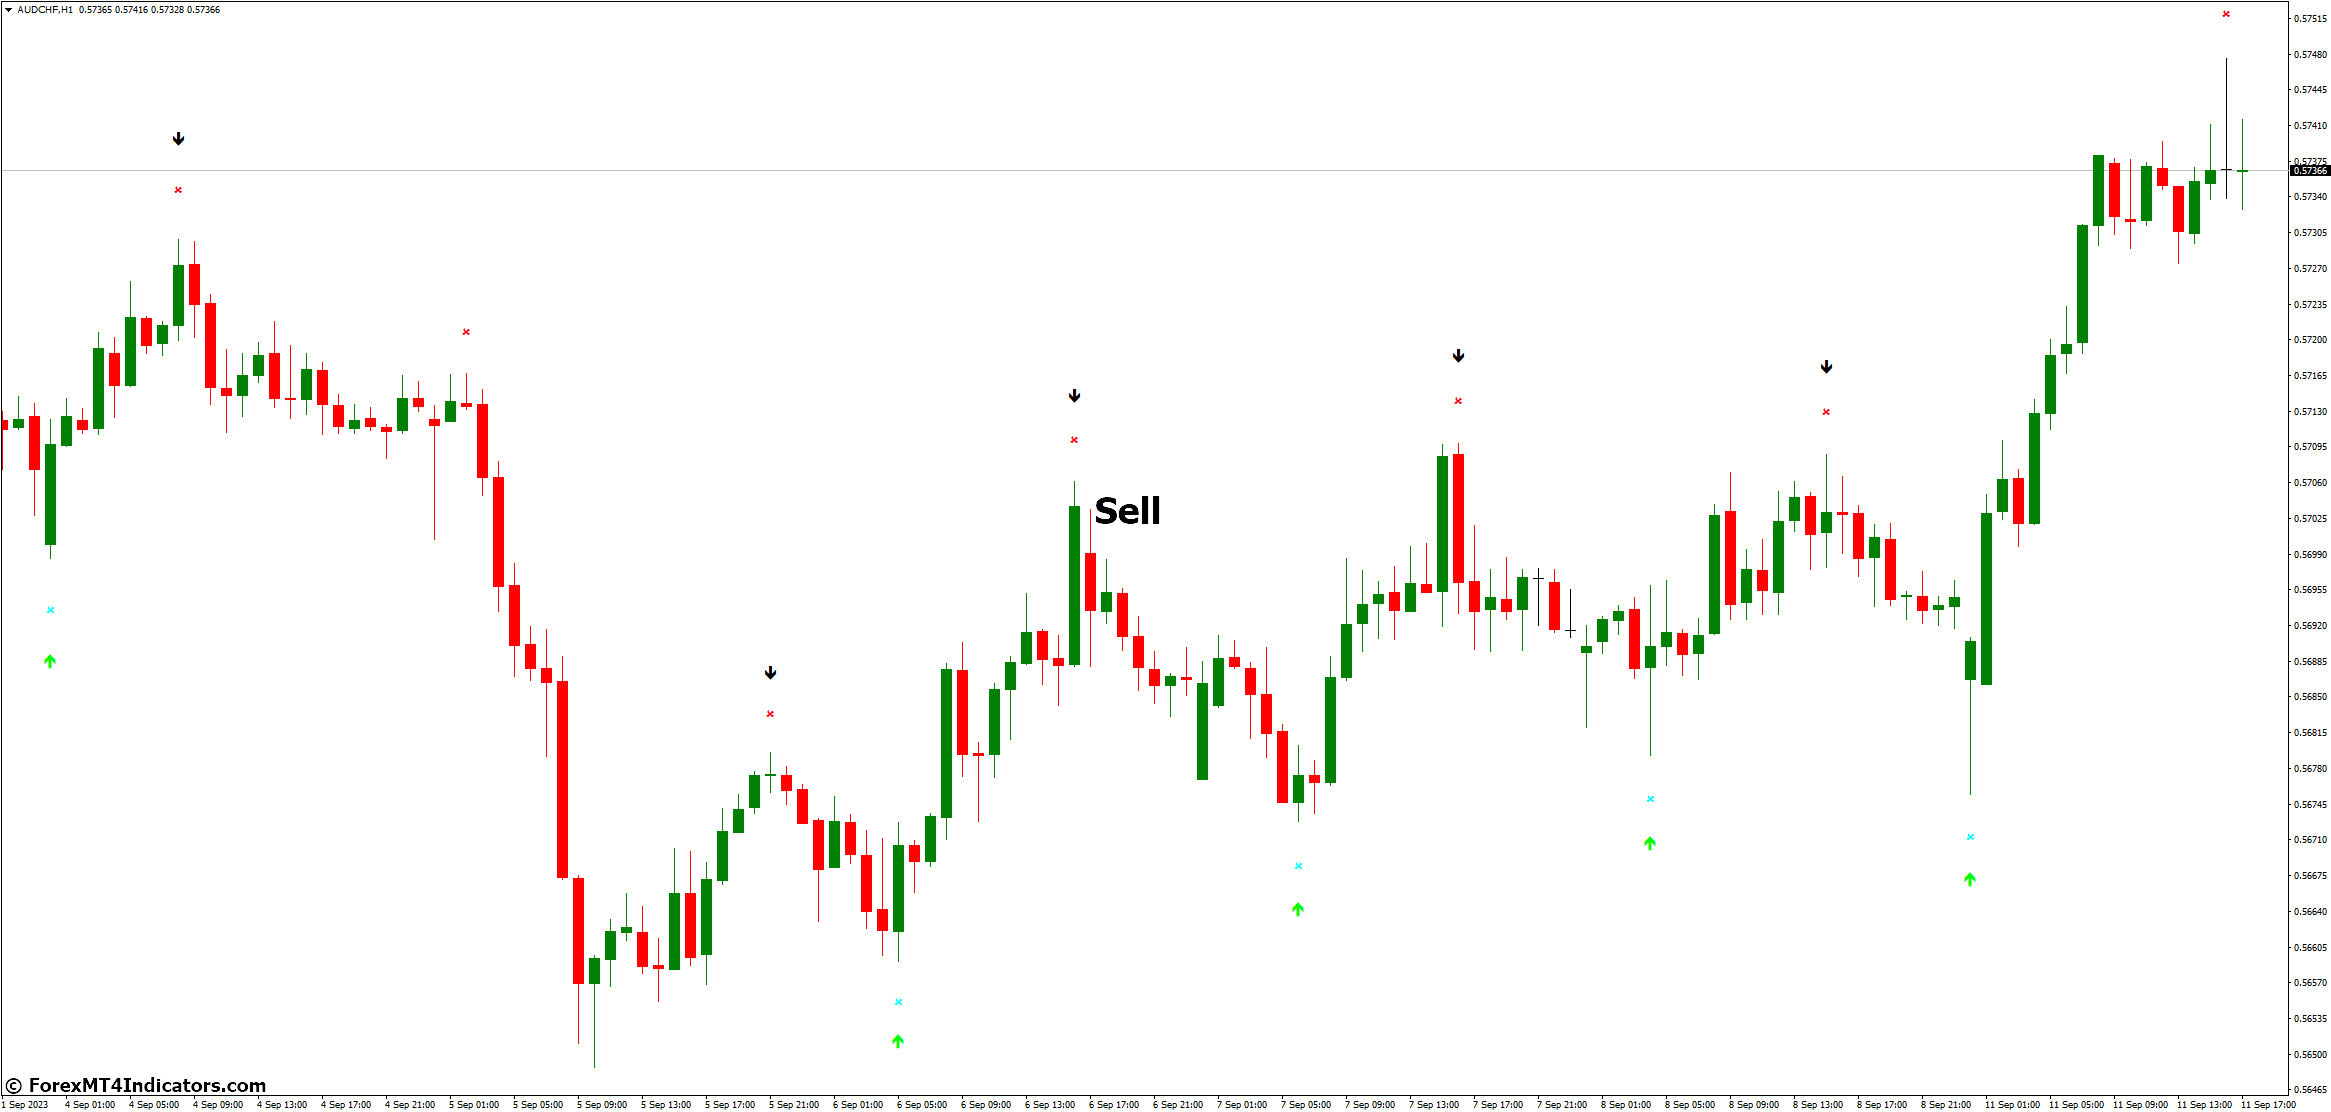 How to Trade with Super Signal V3 MT4 Indicator - Sell Entry